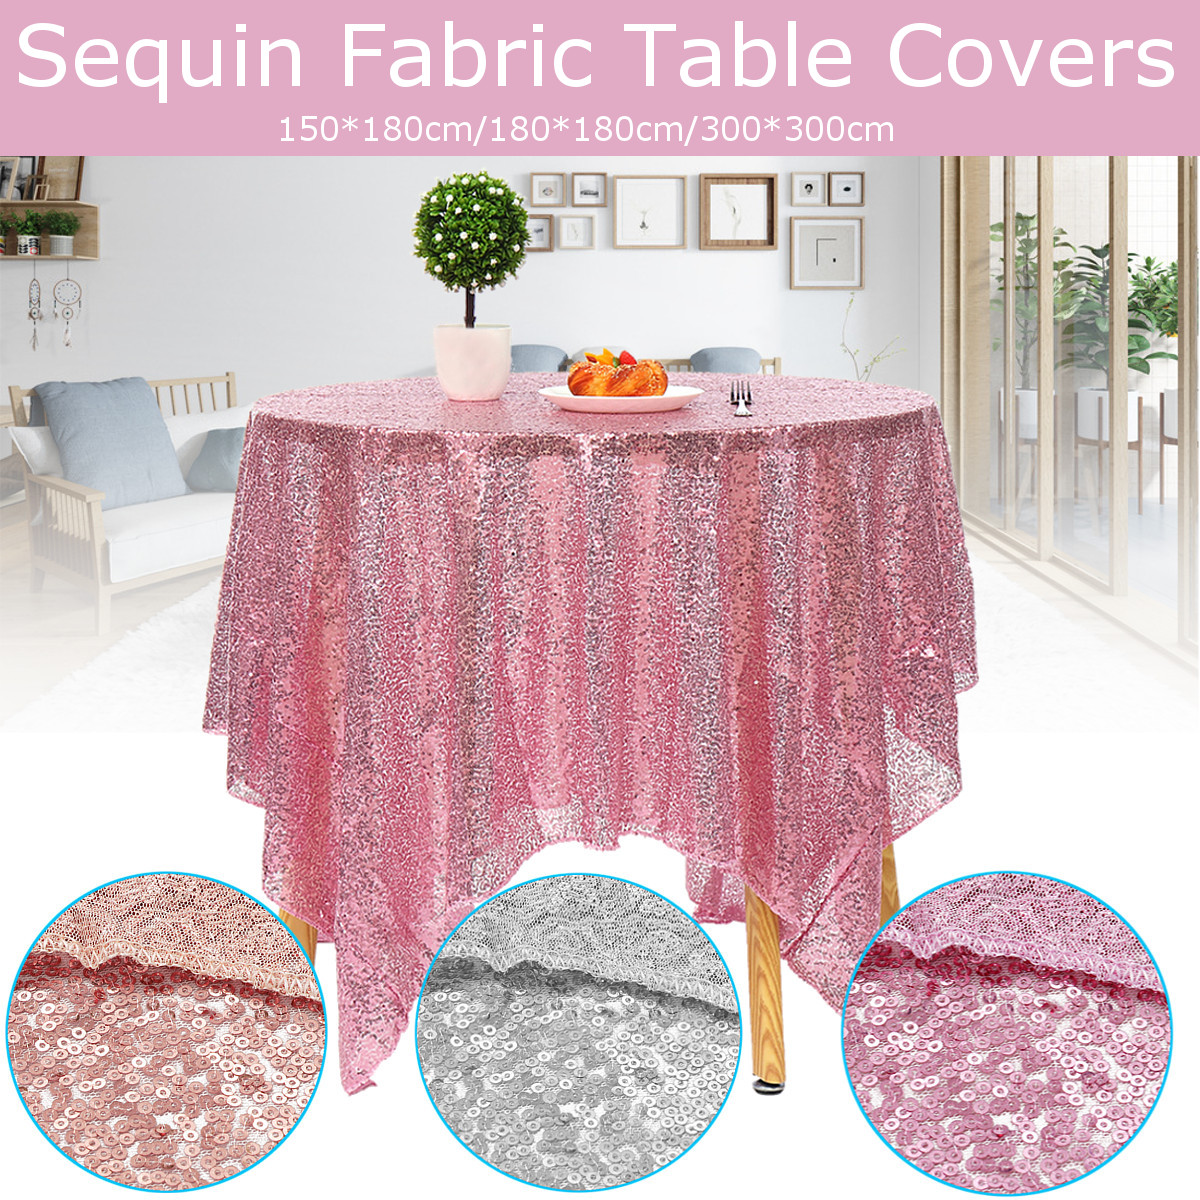 Sequin-Fabric-Wedding-Party-Table-Covers-Photography-Backdrop-Curtains-Table-Cloth-1636379-1